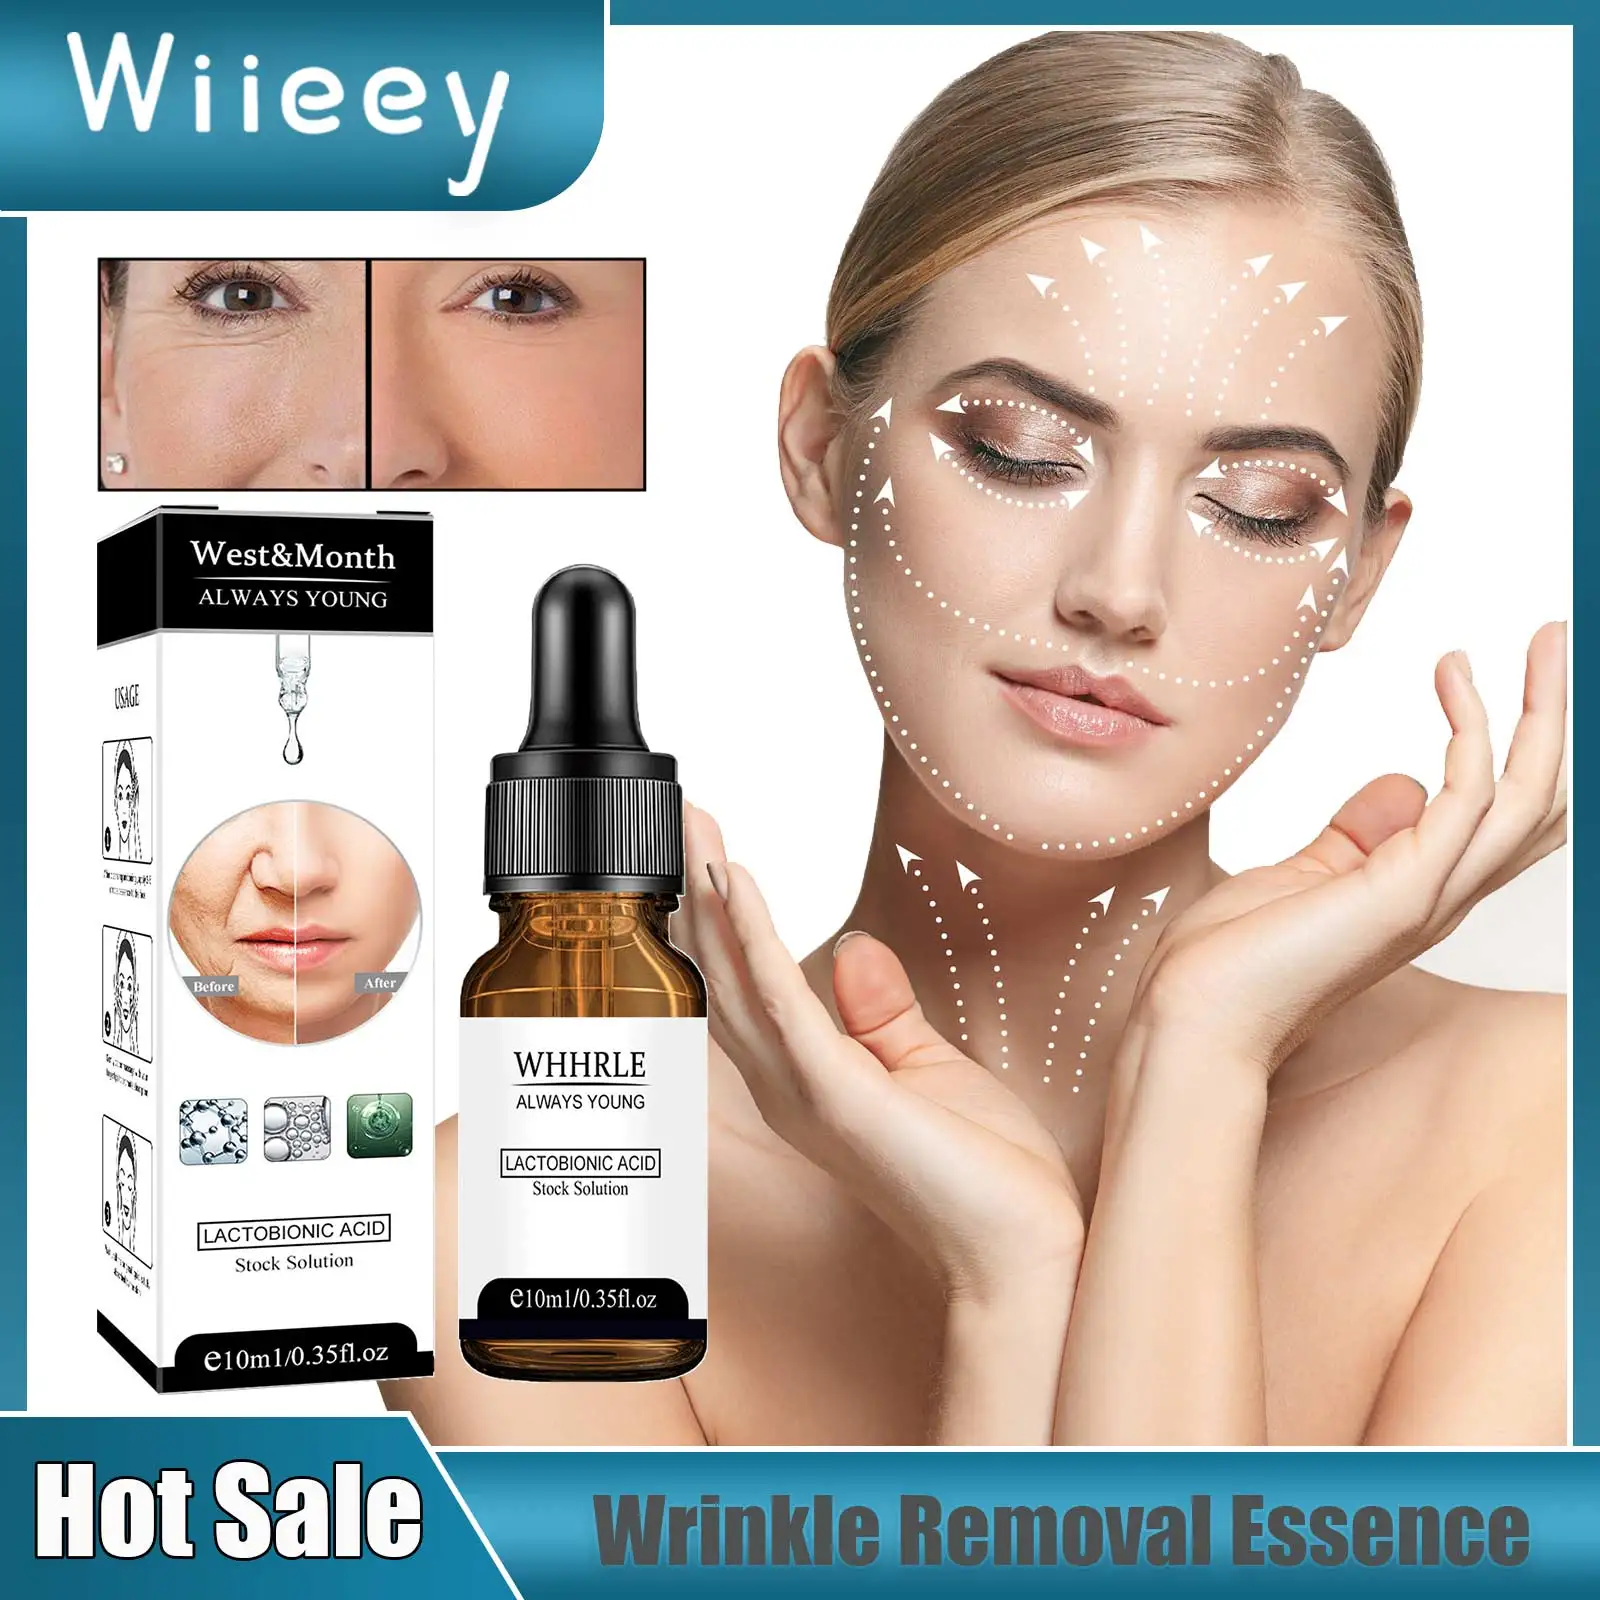 

Wrinkle Remover Face Serum Shrink Pores Brightening Lifting Fade Fine Lines Dark Spots Firming Anti-aging Whitening Skin Essence